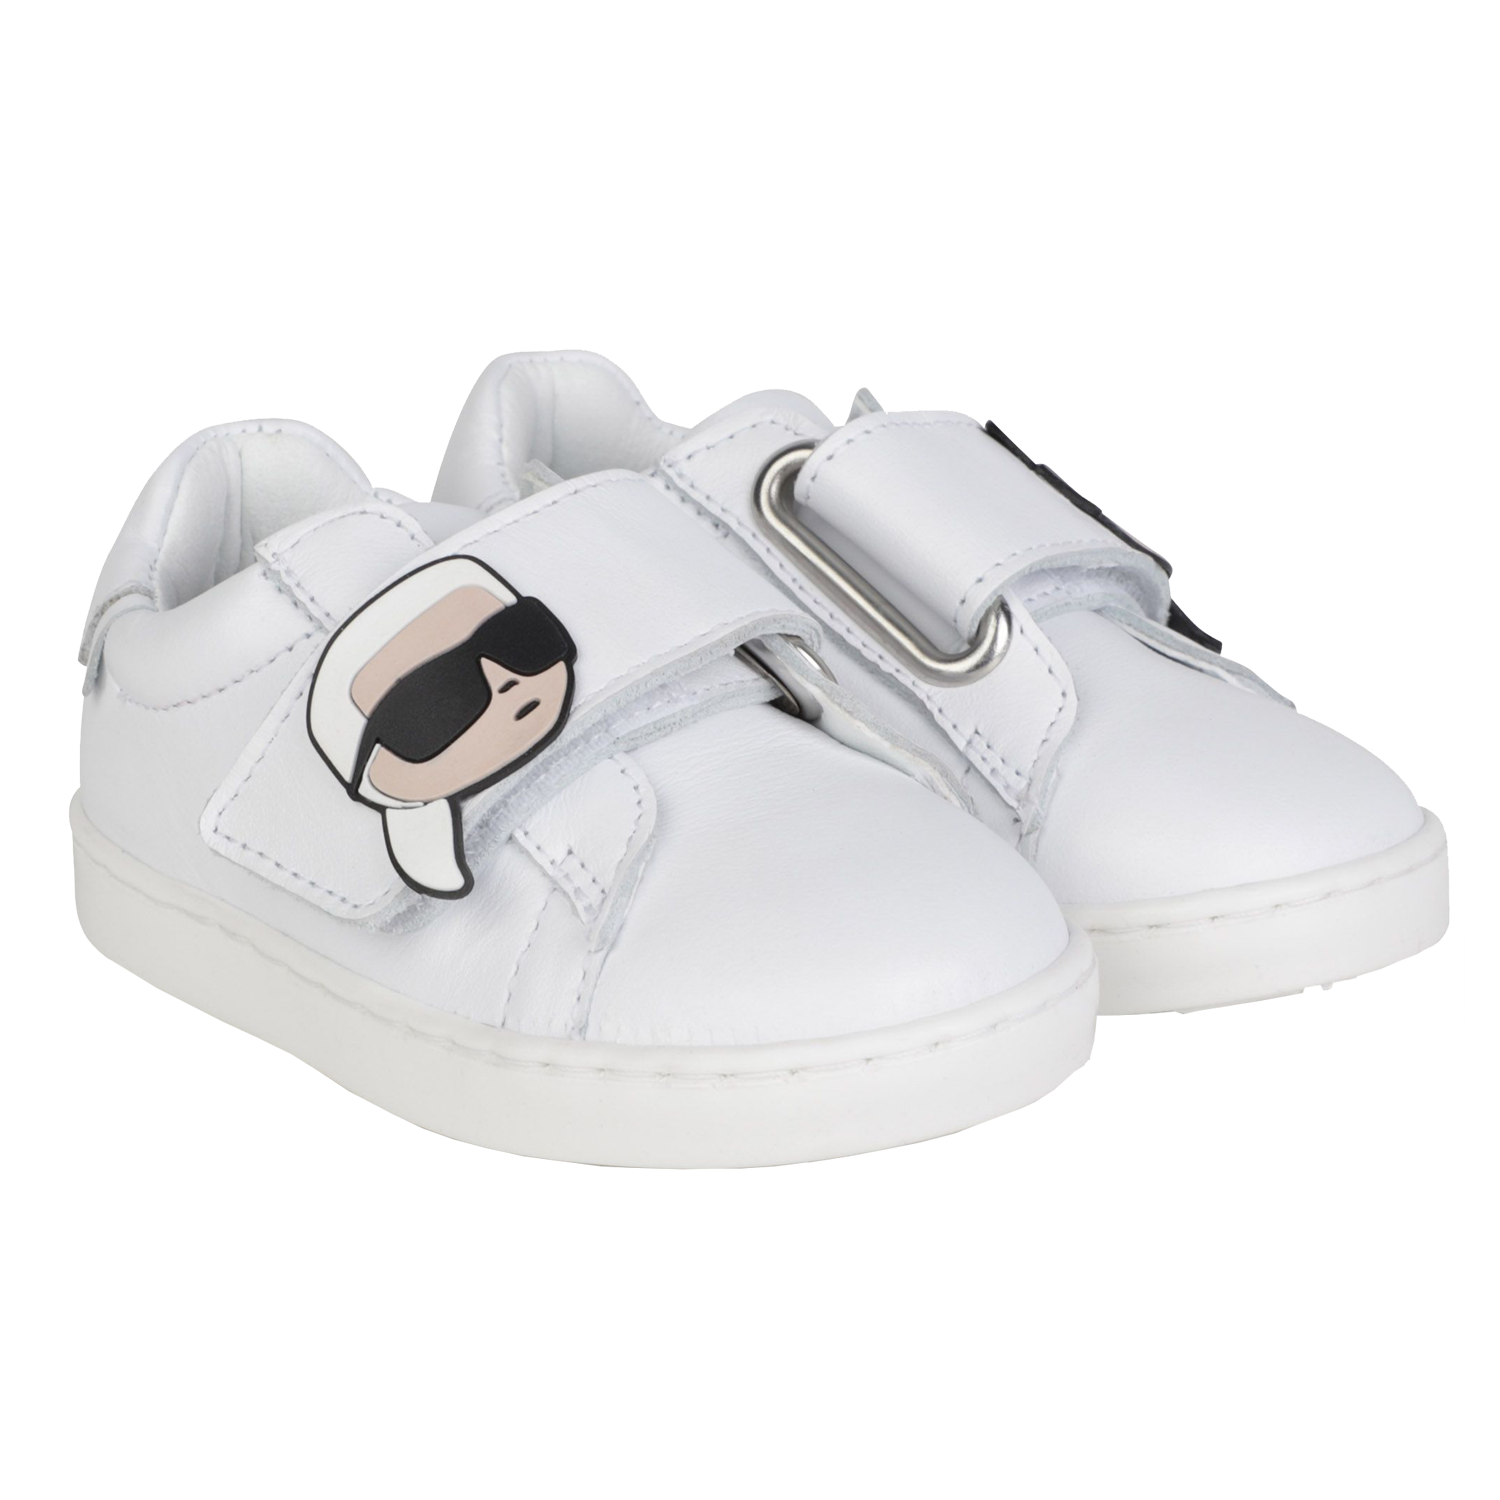 Karl Lagerfeld Velcro Sneakers With Patch - White